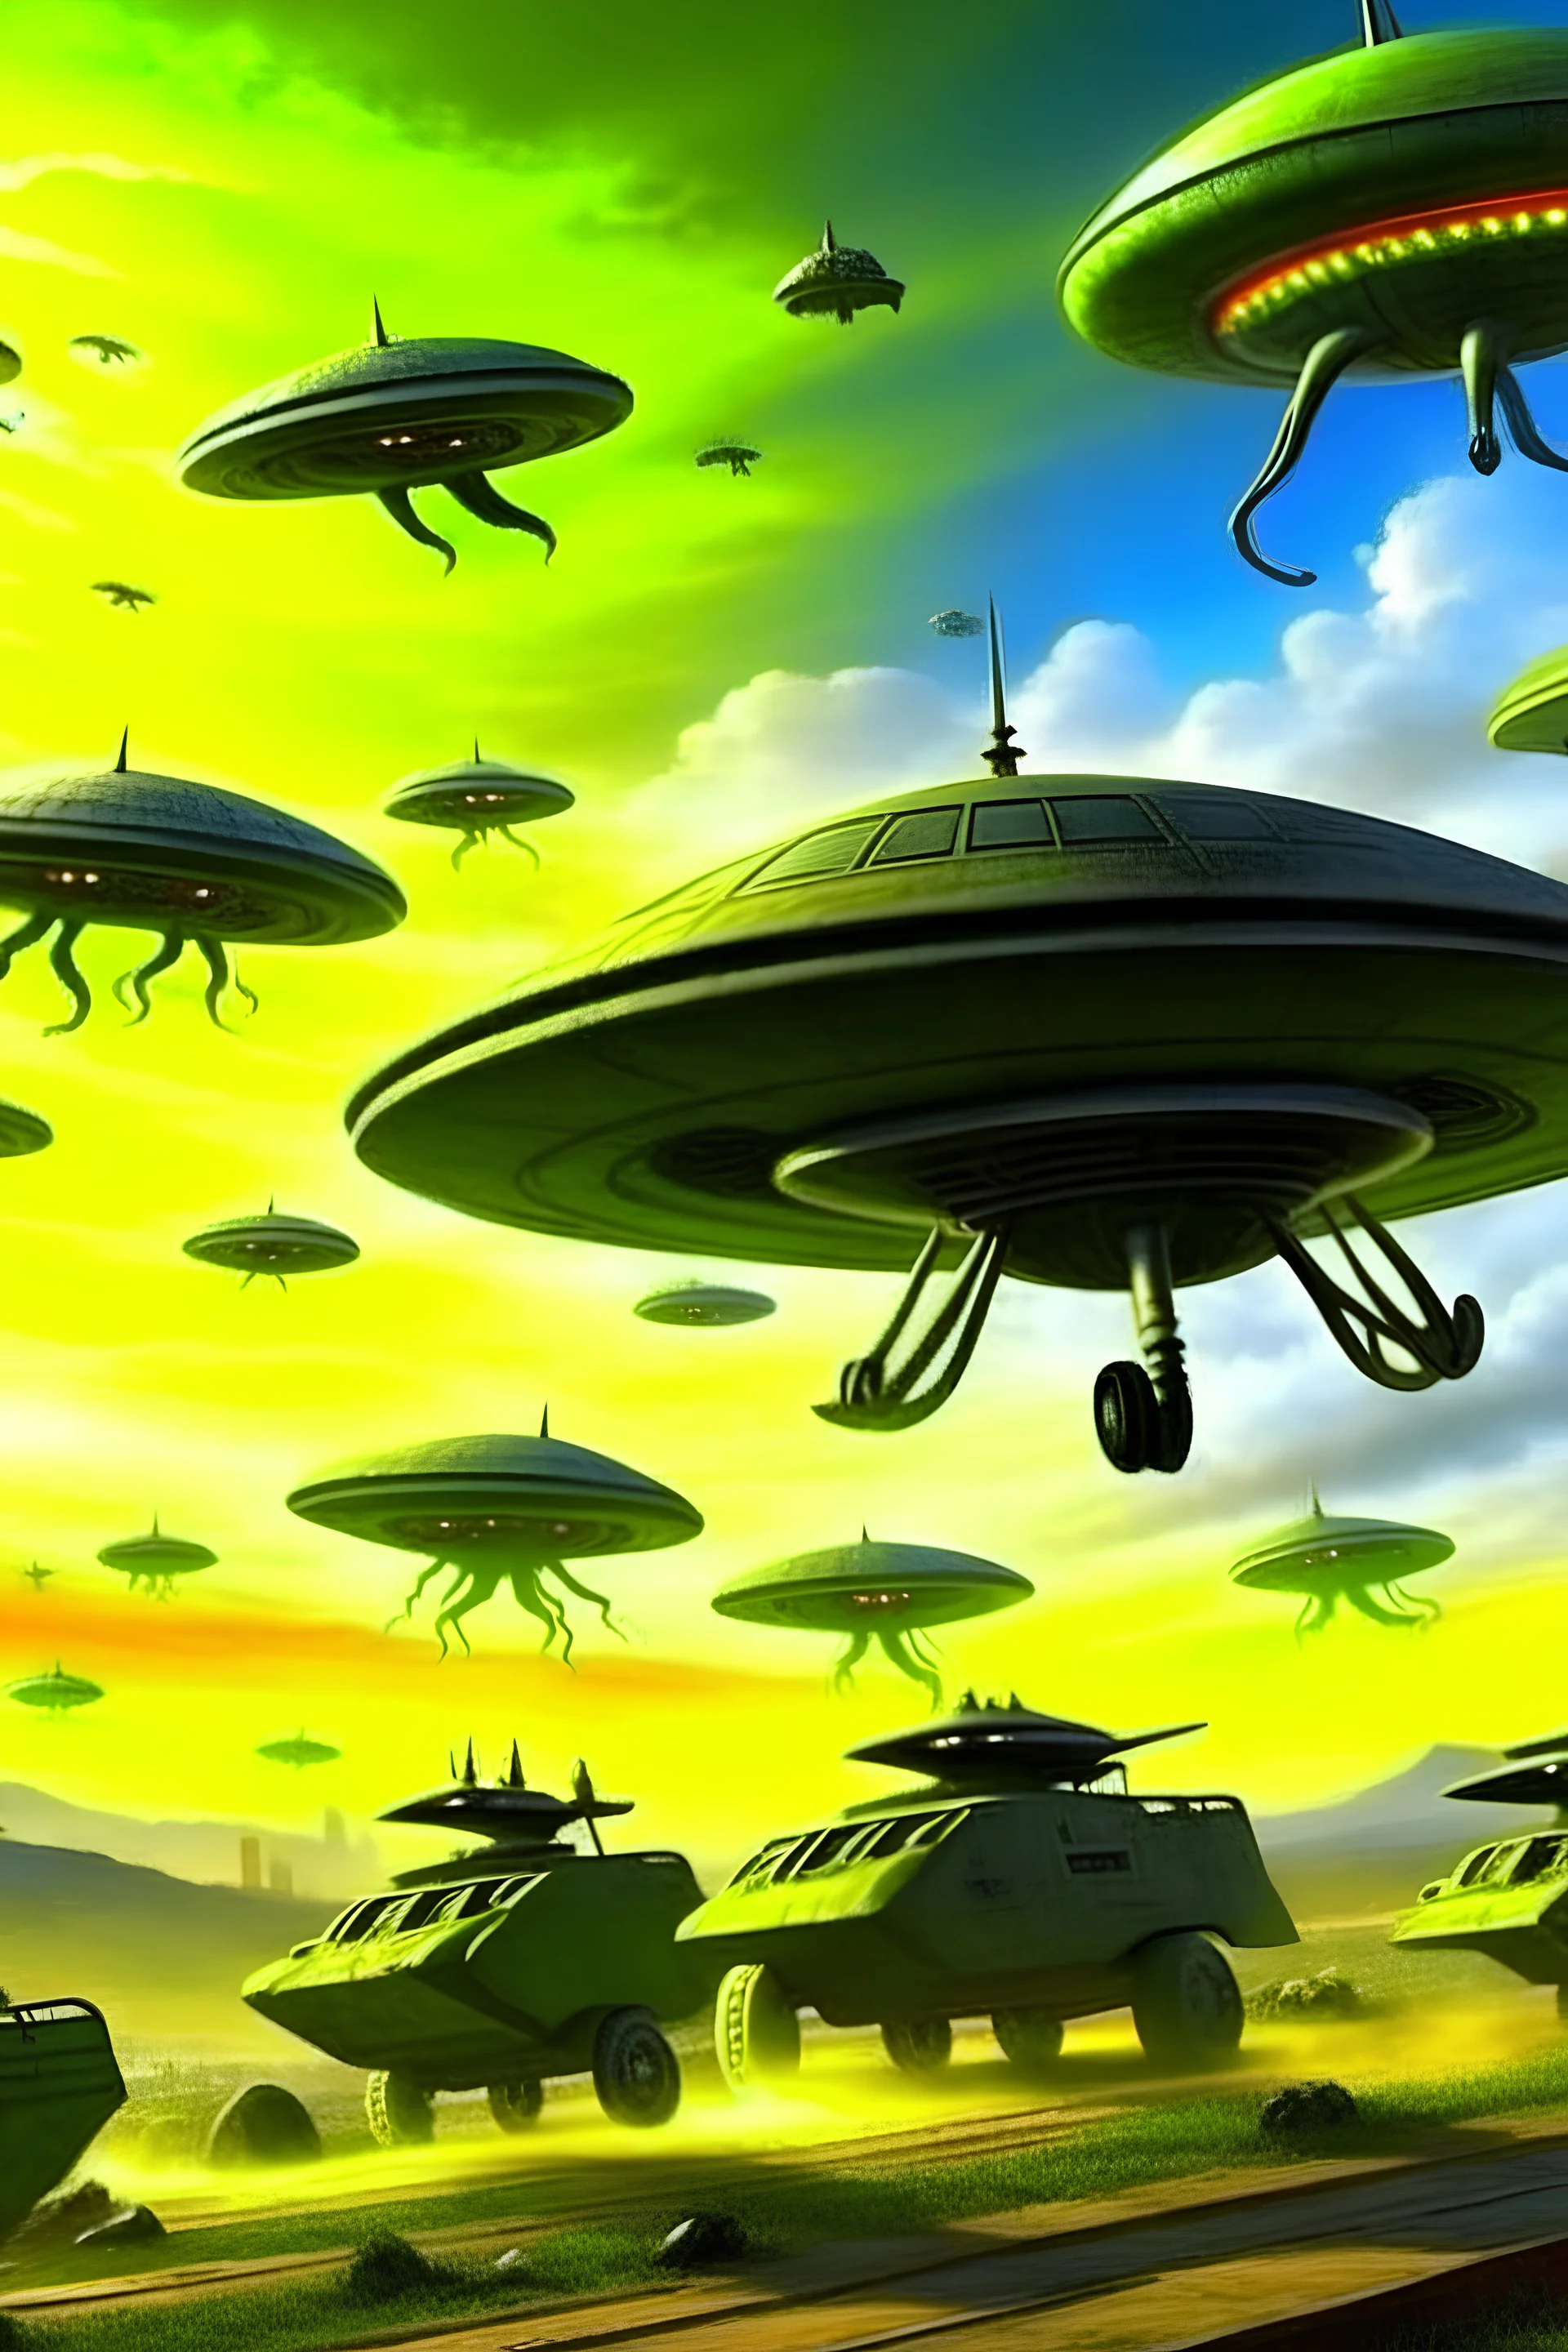 Battle aliens invade the earth and confront the planes